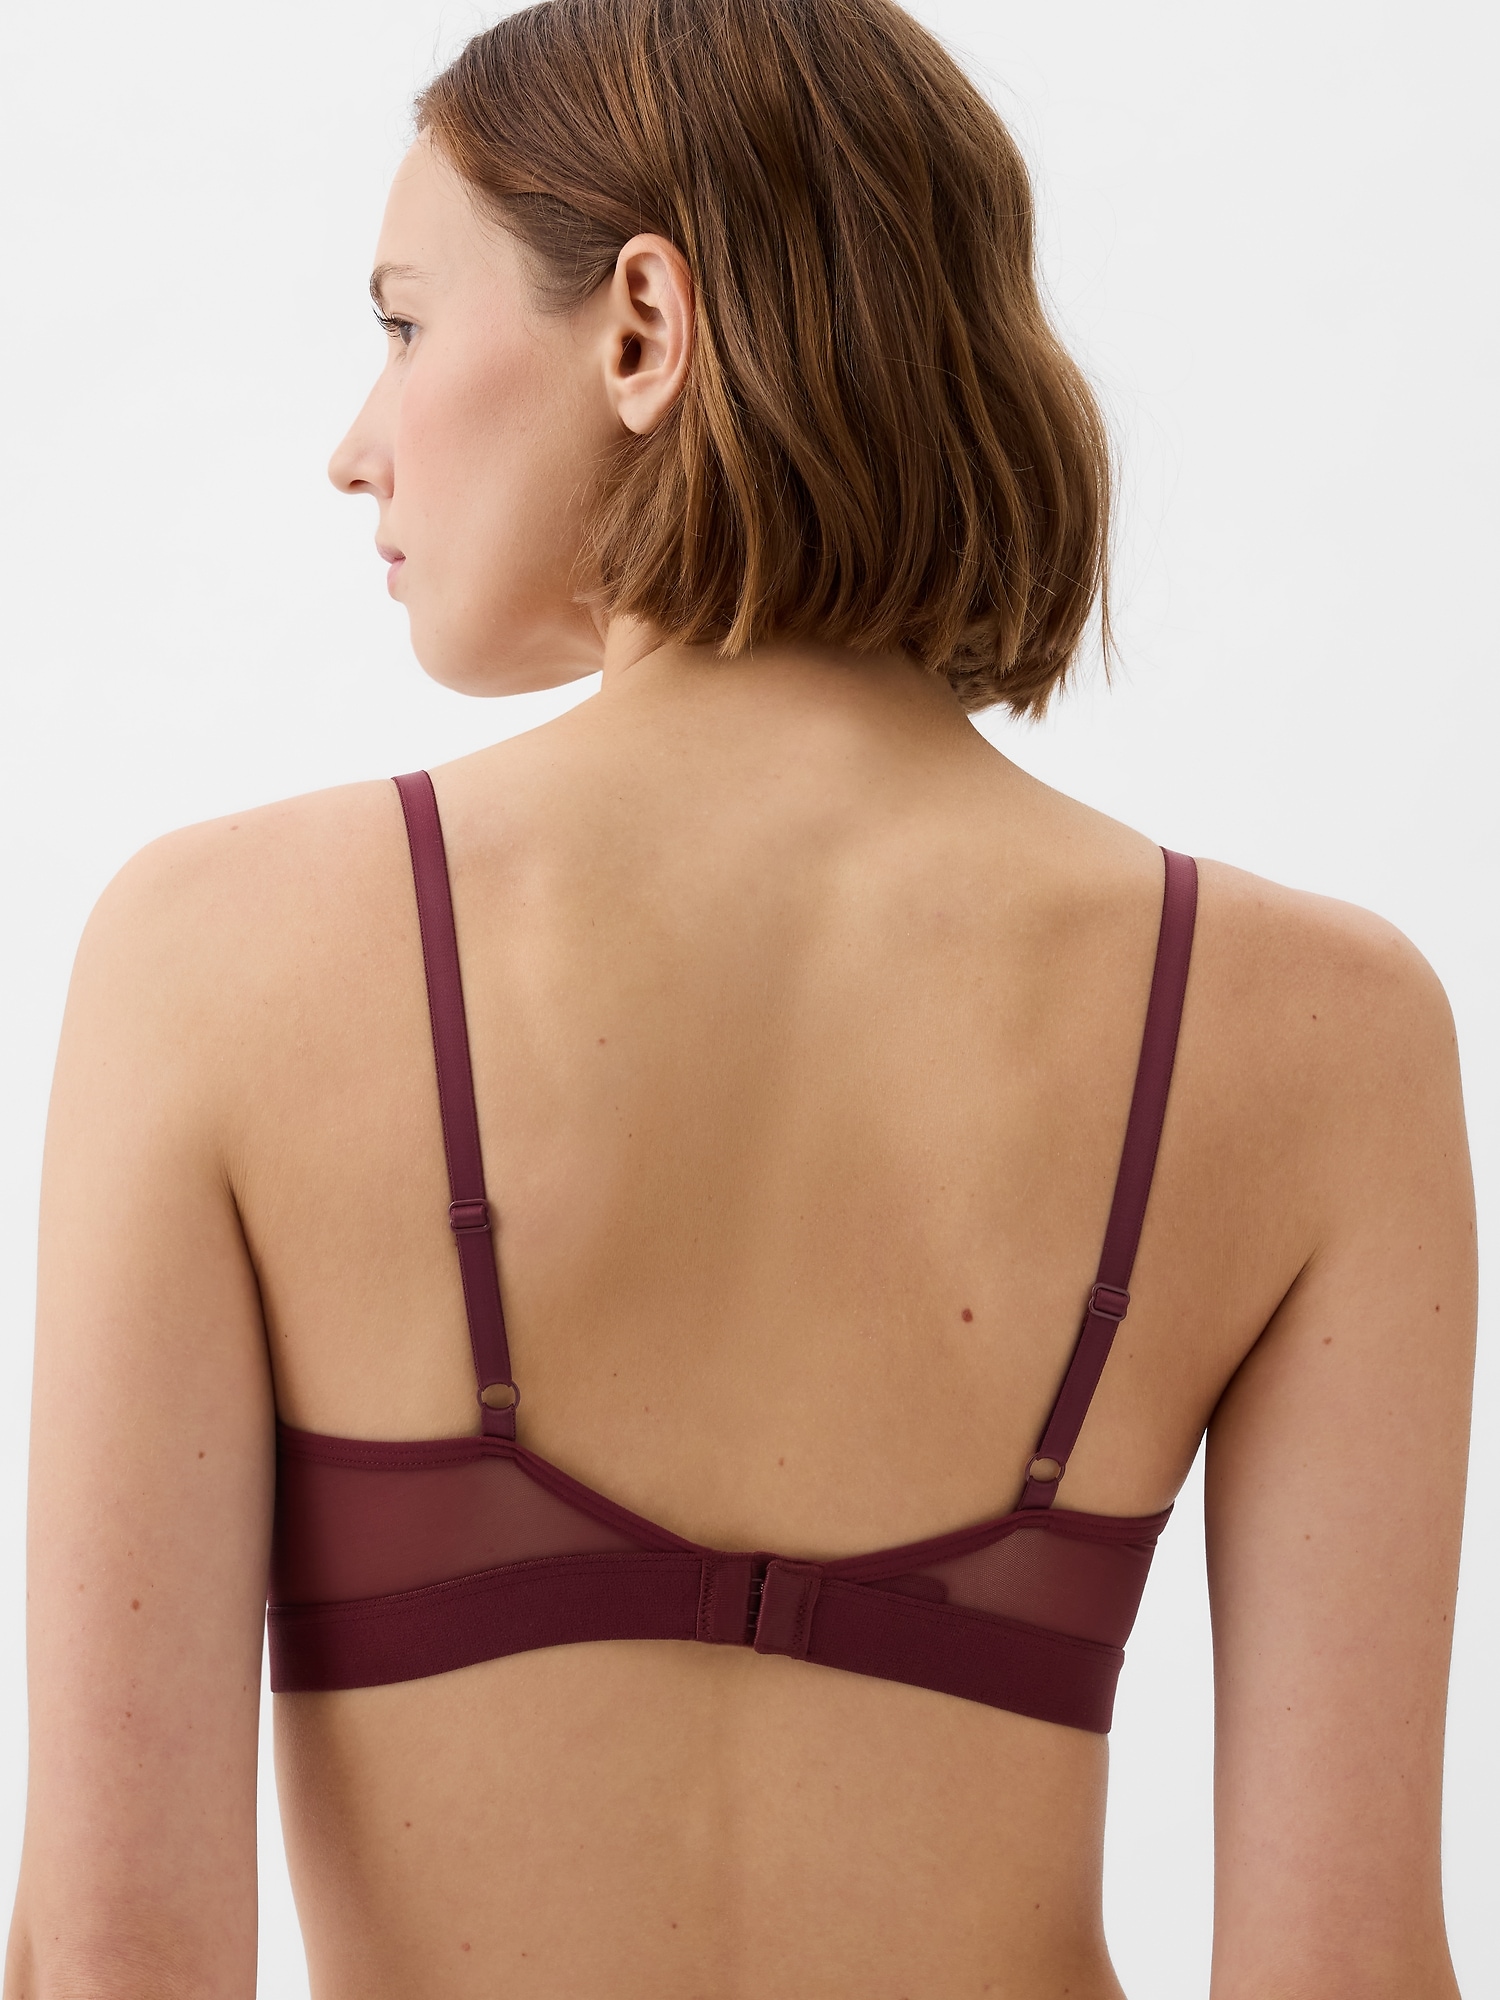 Best Place to Buy Discontinued Bras for Women Online - My Discontinued Bra